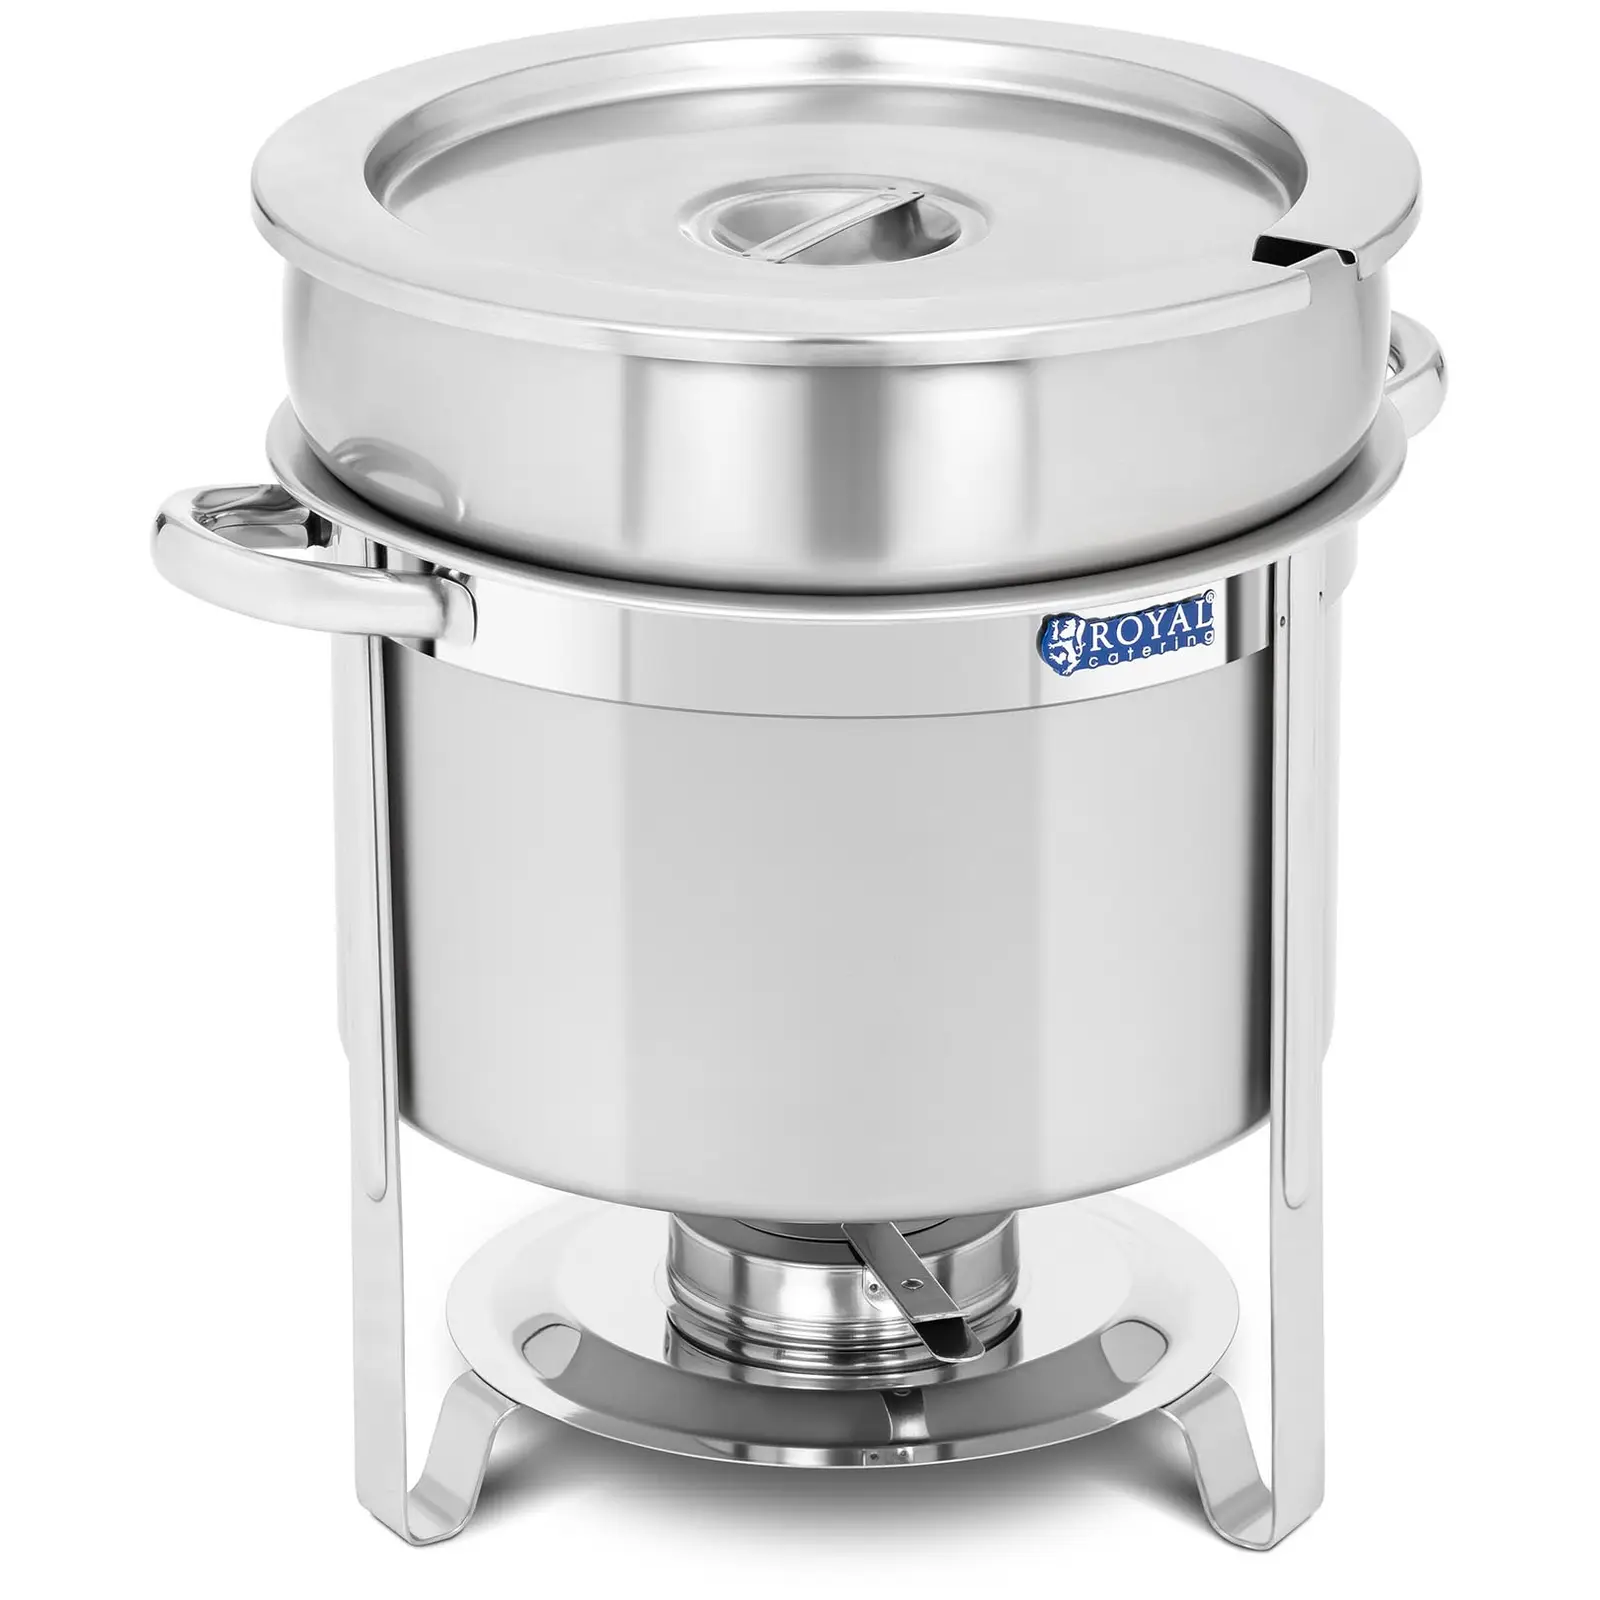 Chafing dish rond - 10,5 l